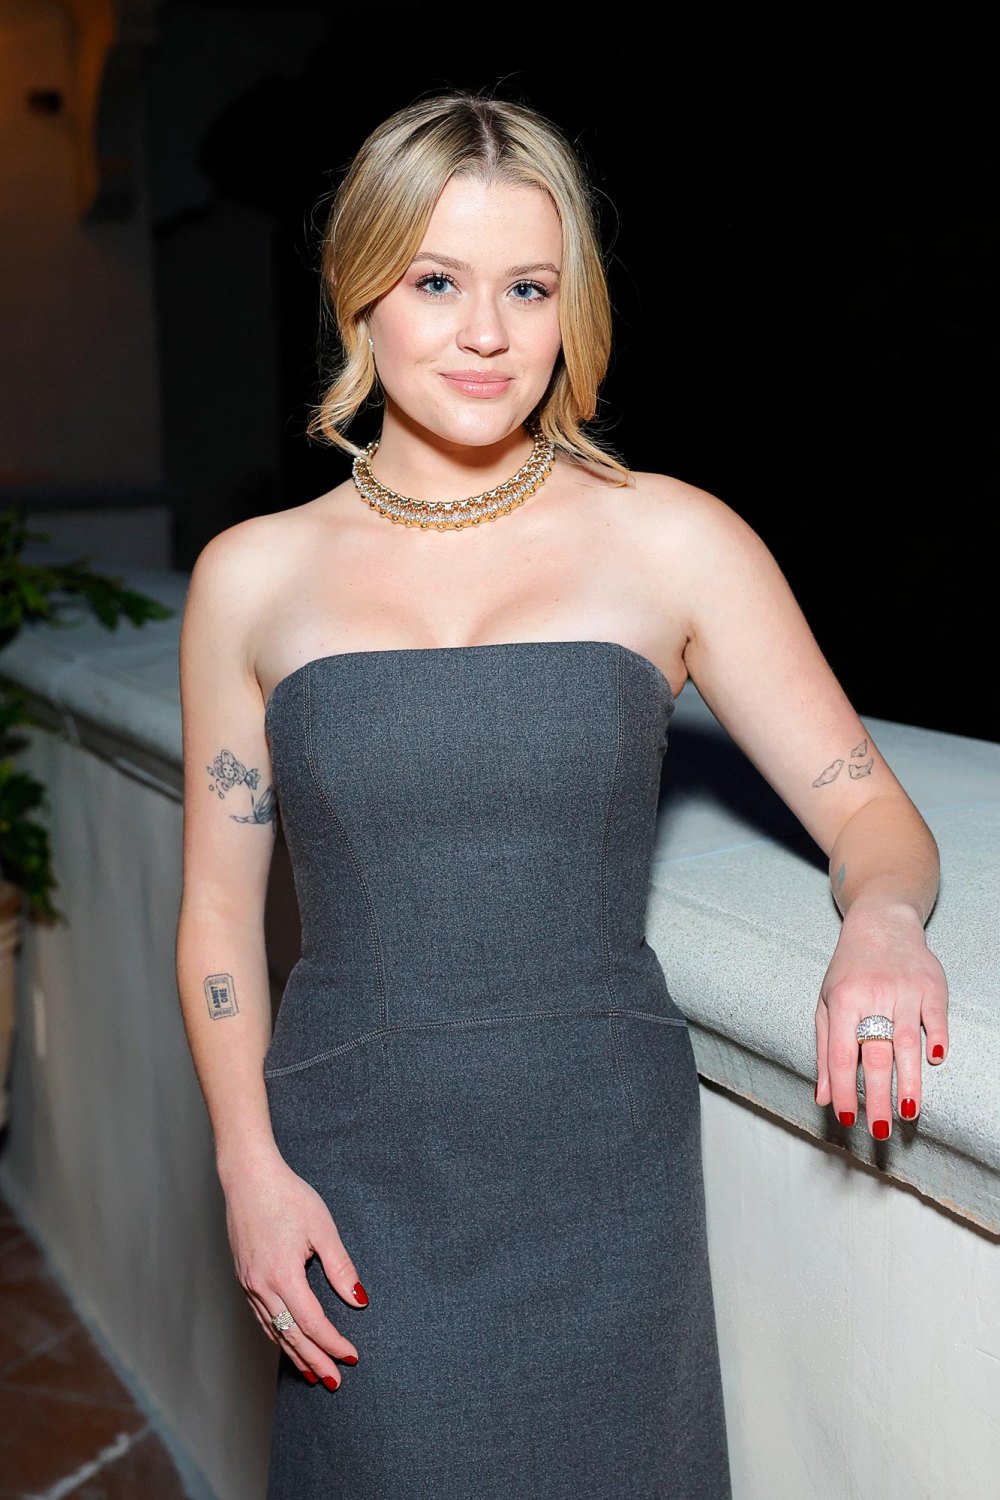 Reese Witherspoon's daughter Ava shows off tattoos at Tiffany Co Event 293